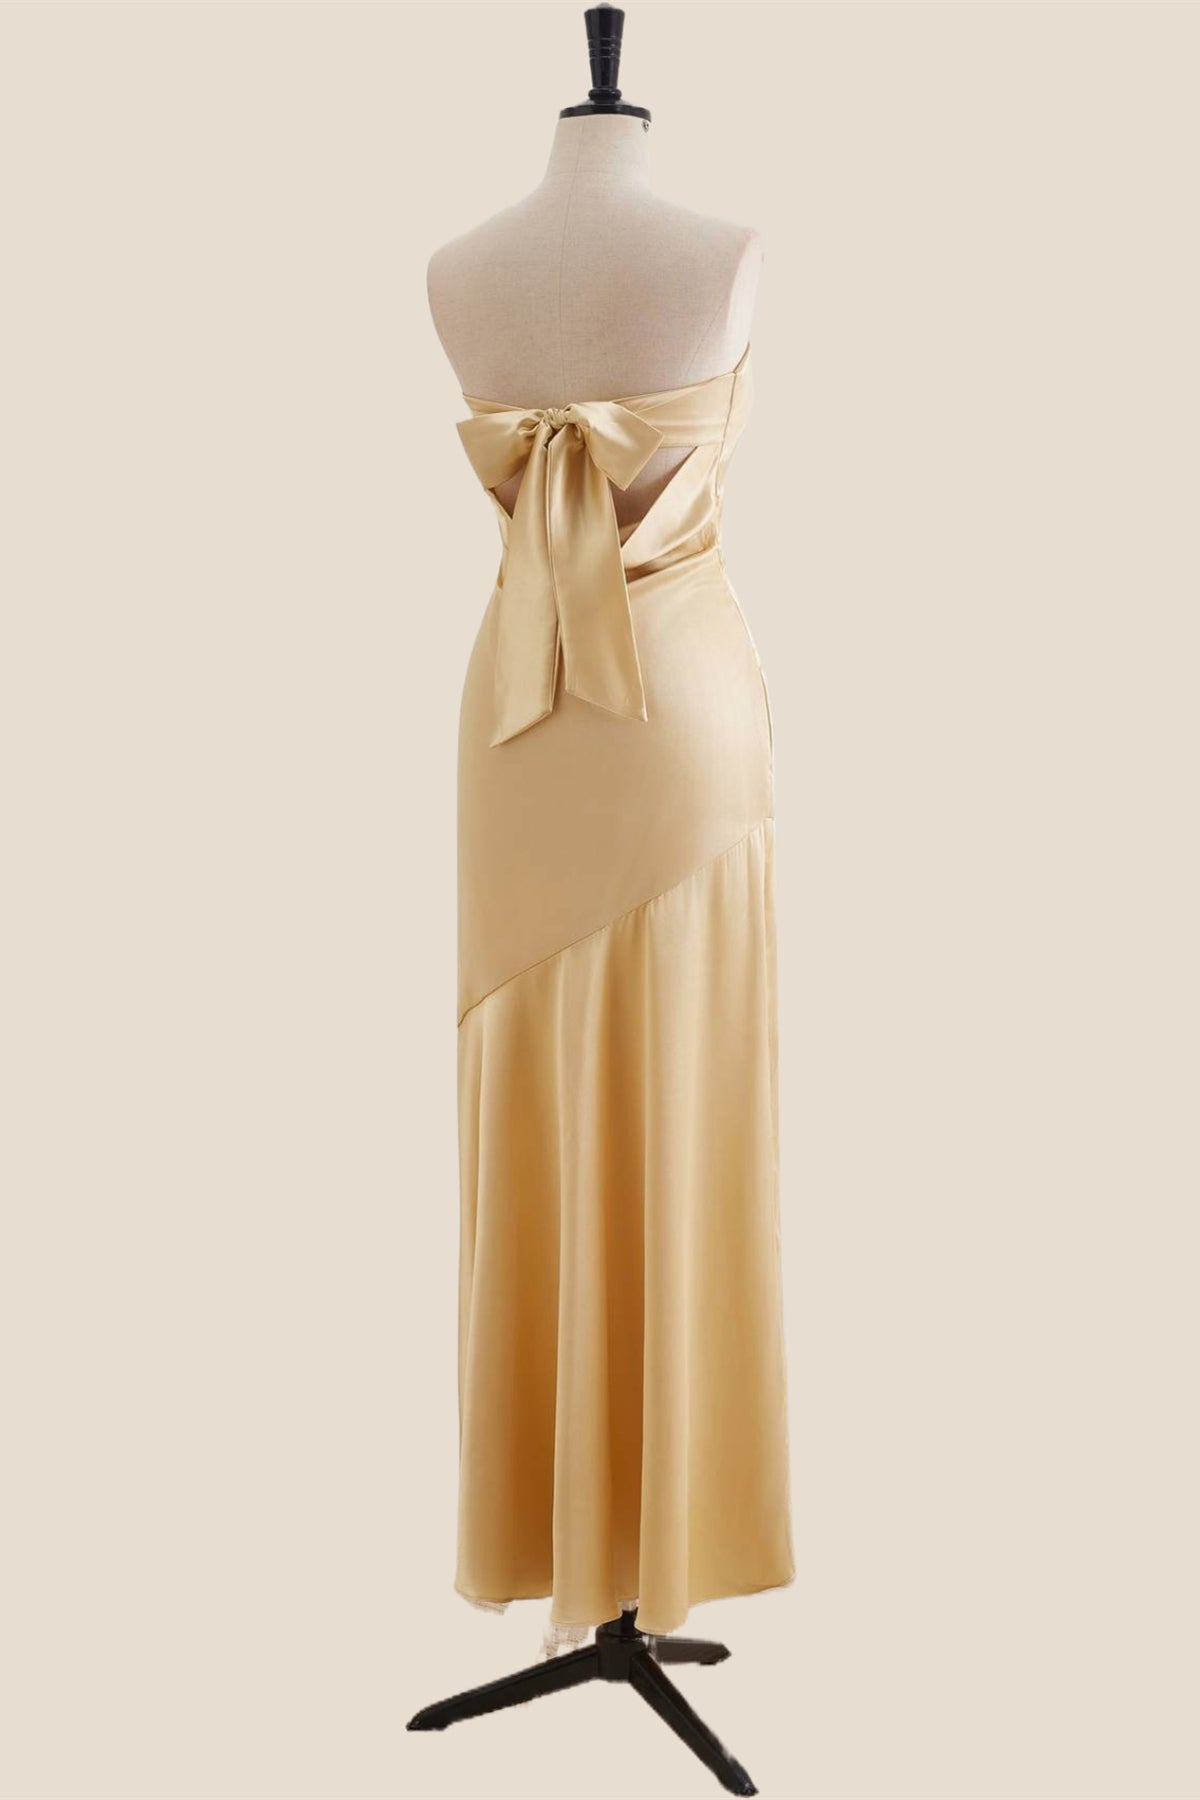 Strapless Golden Sheath Long Dress with Back Bow